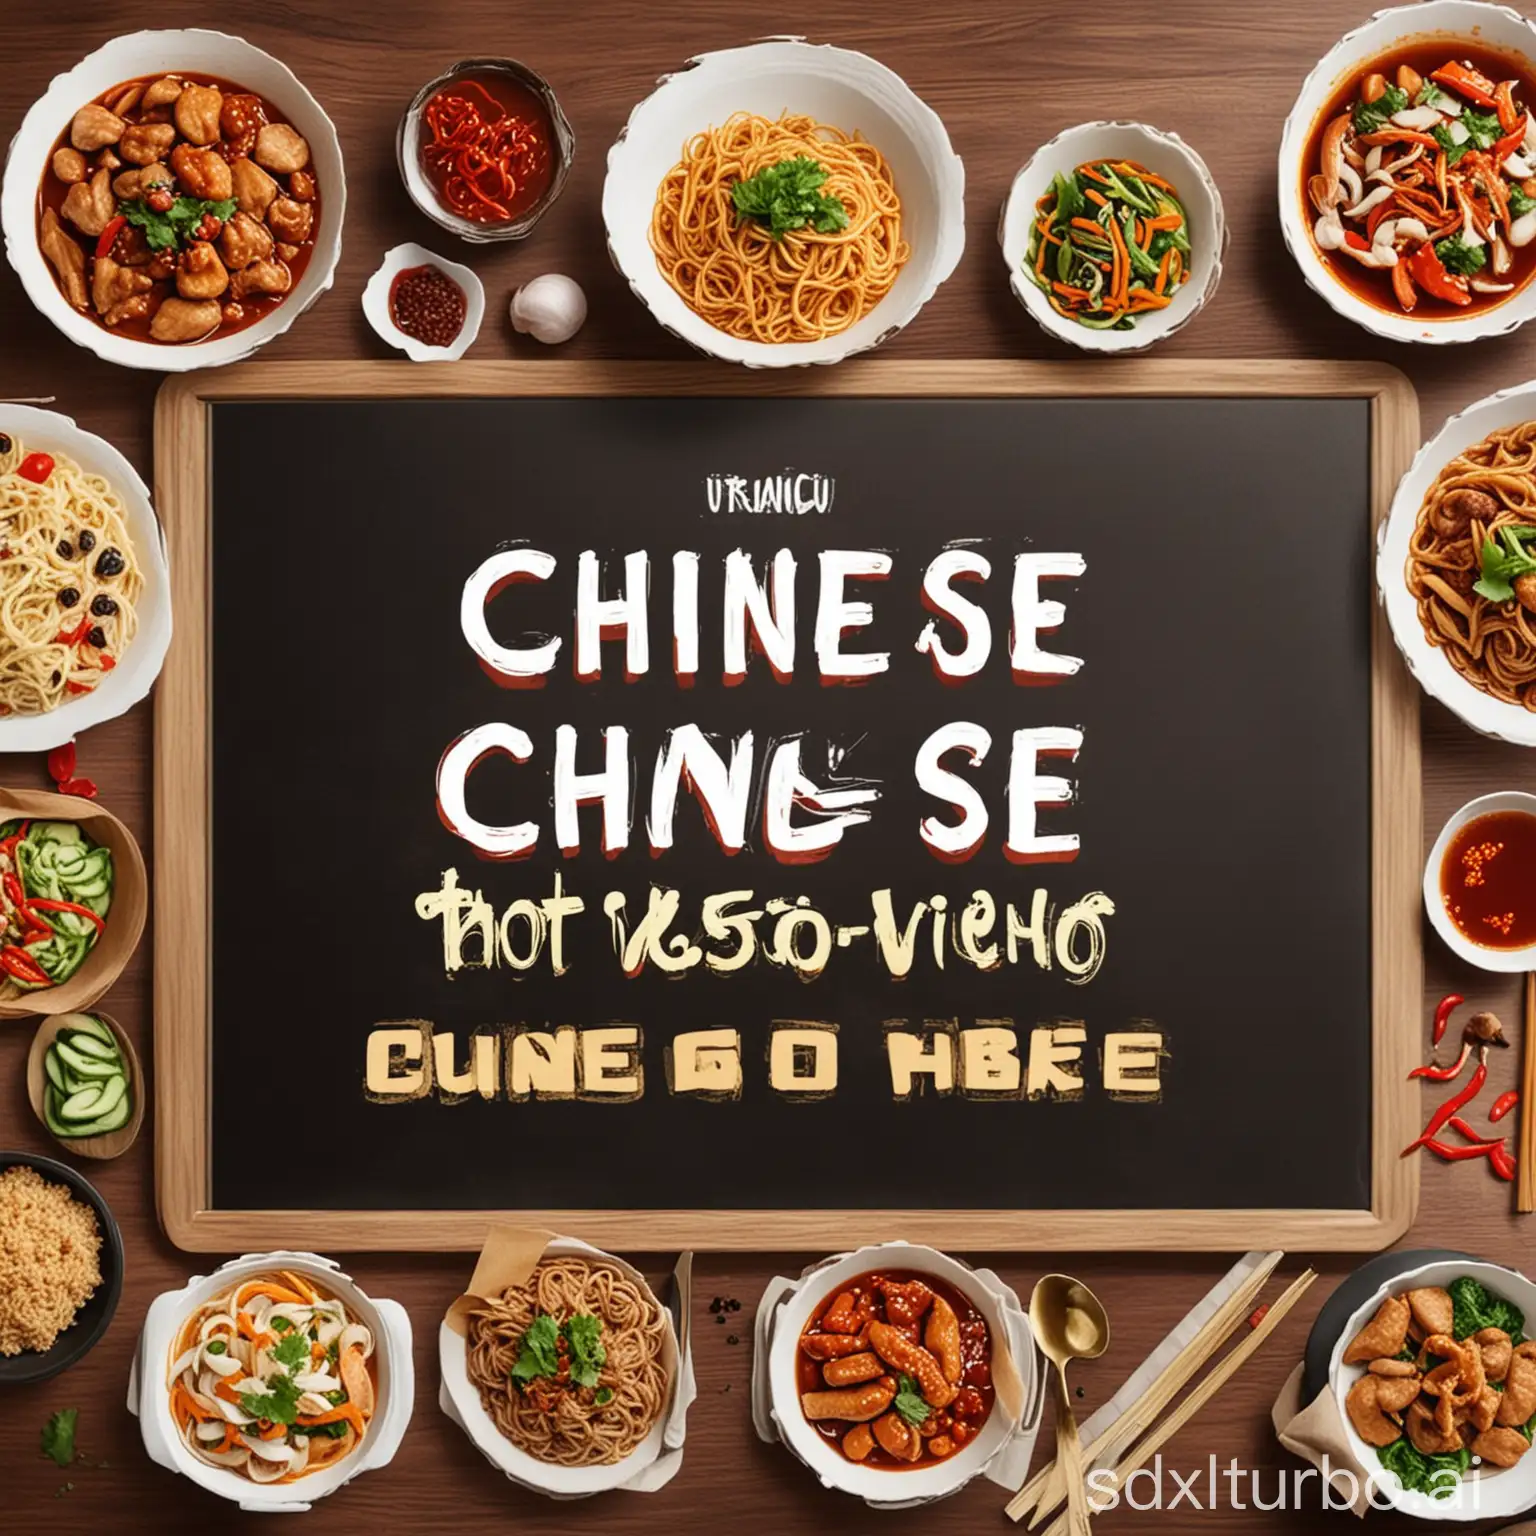 Draw a picture of Chinese cuisine as the video cover